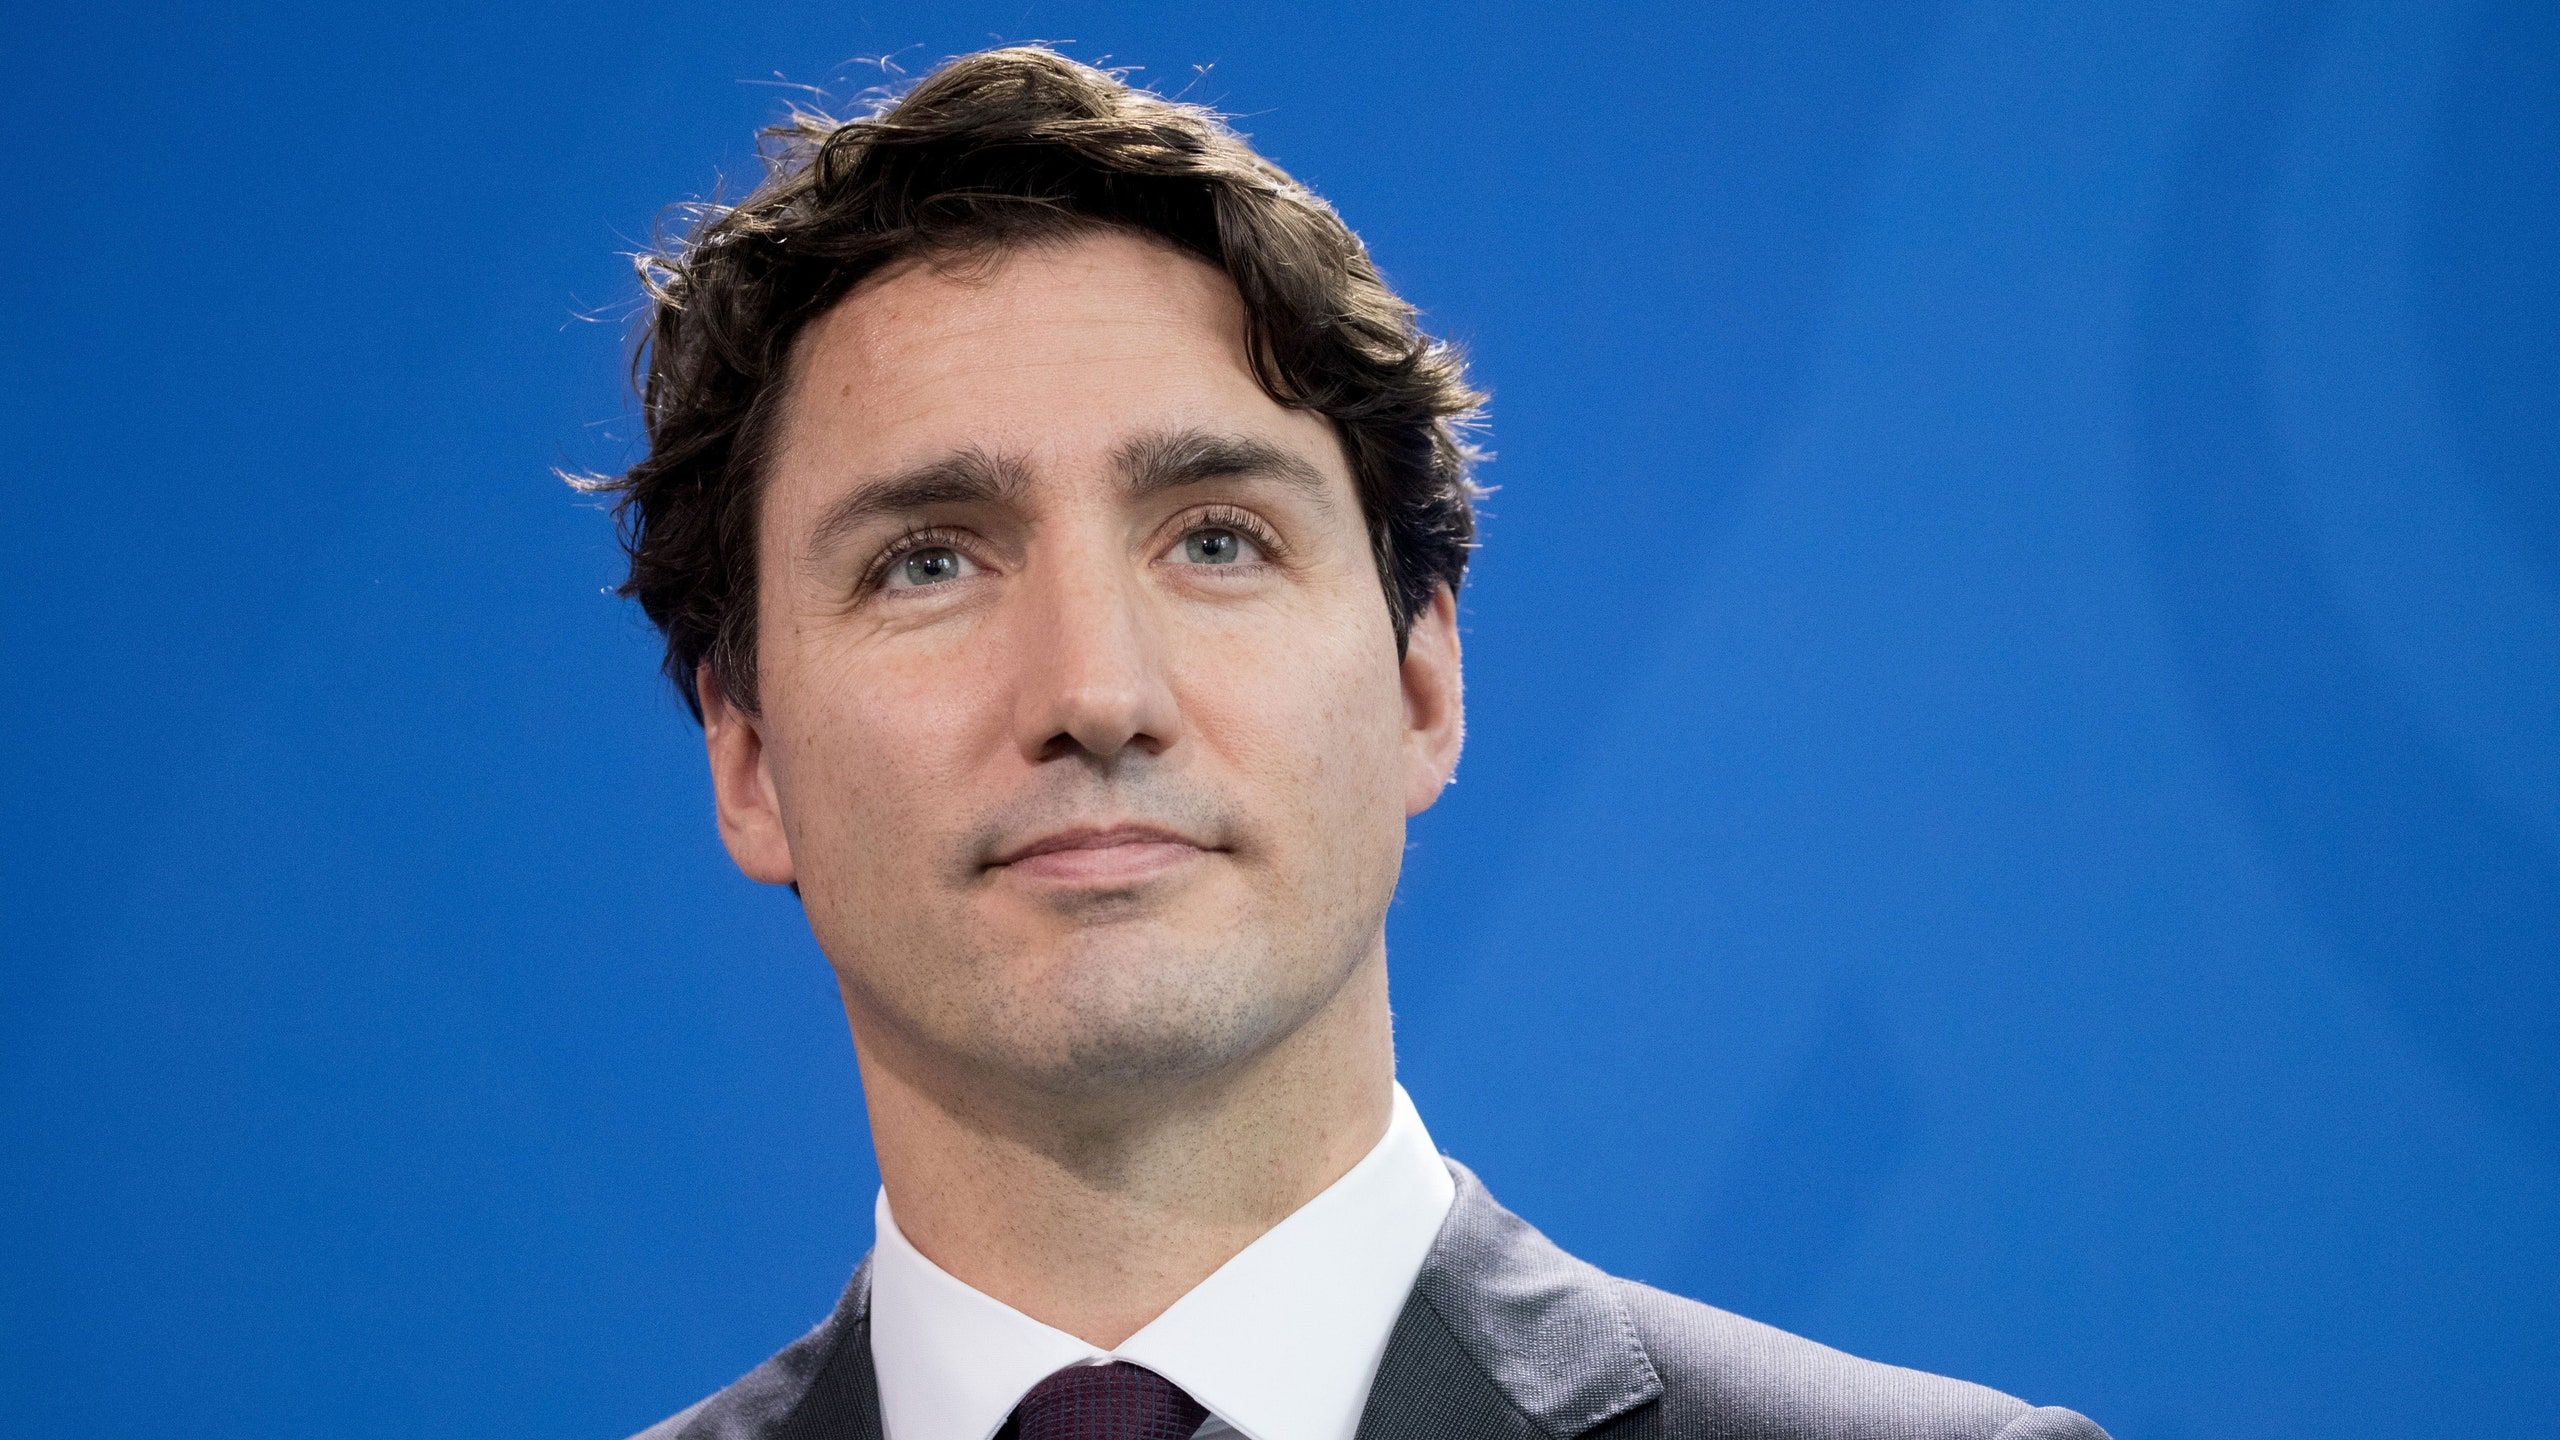 Your Political Fave Justin Trudeau Has Problematic Positions, Too